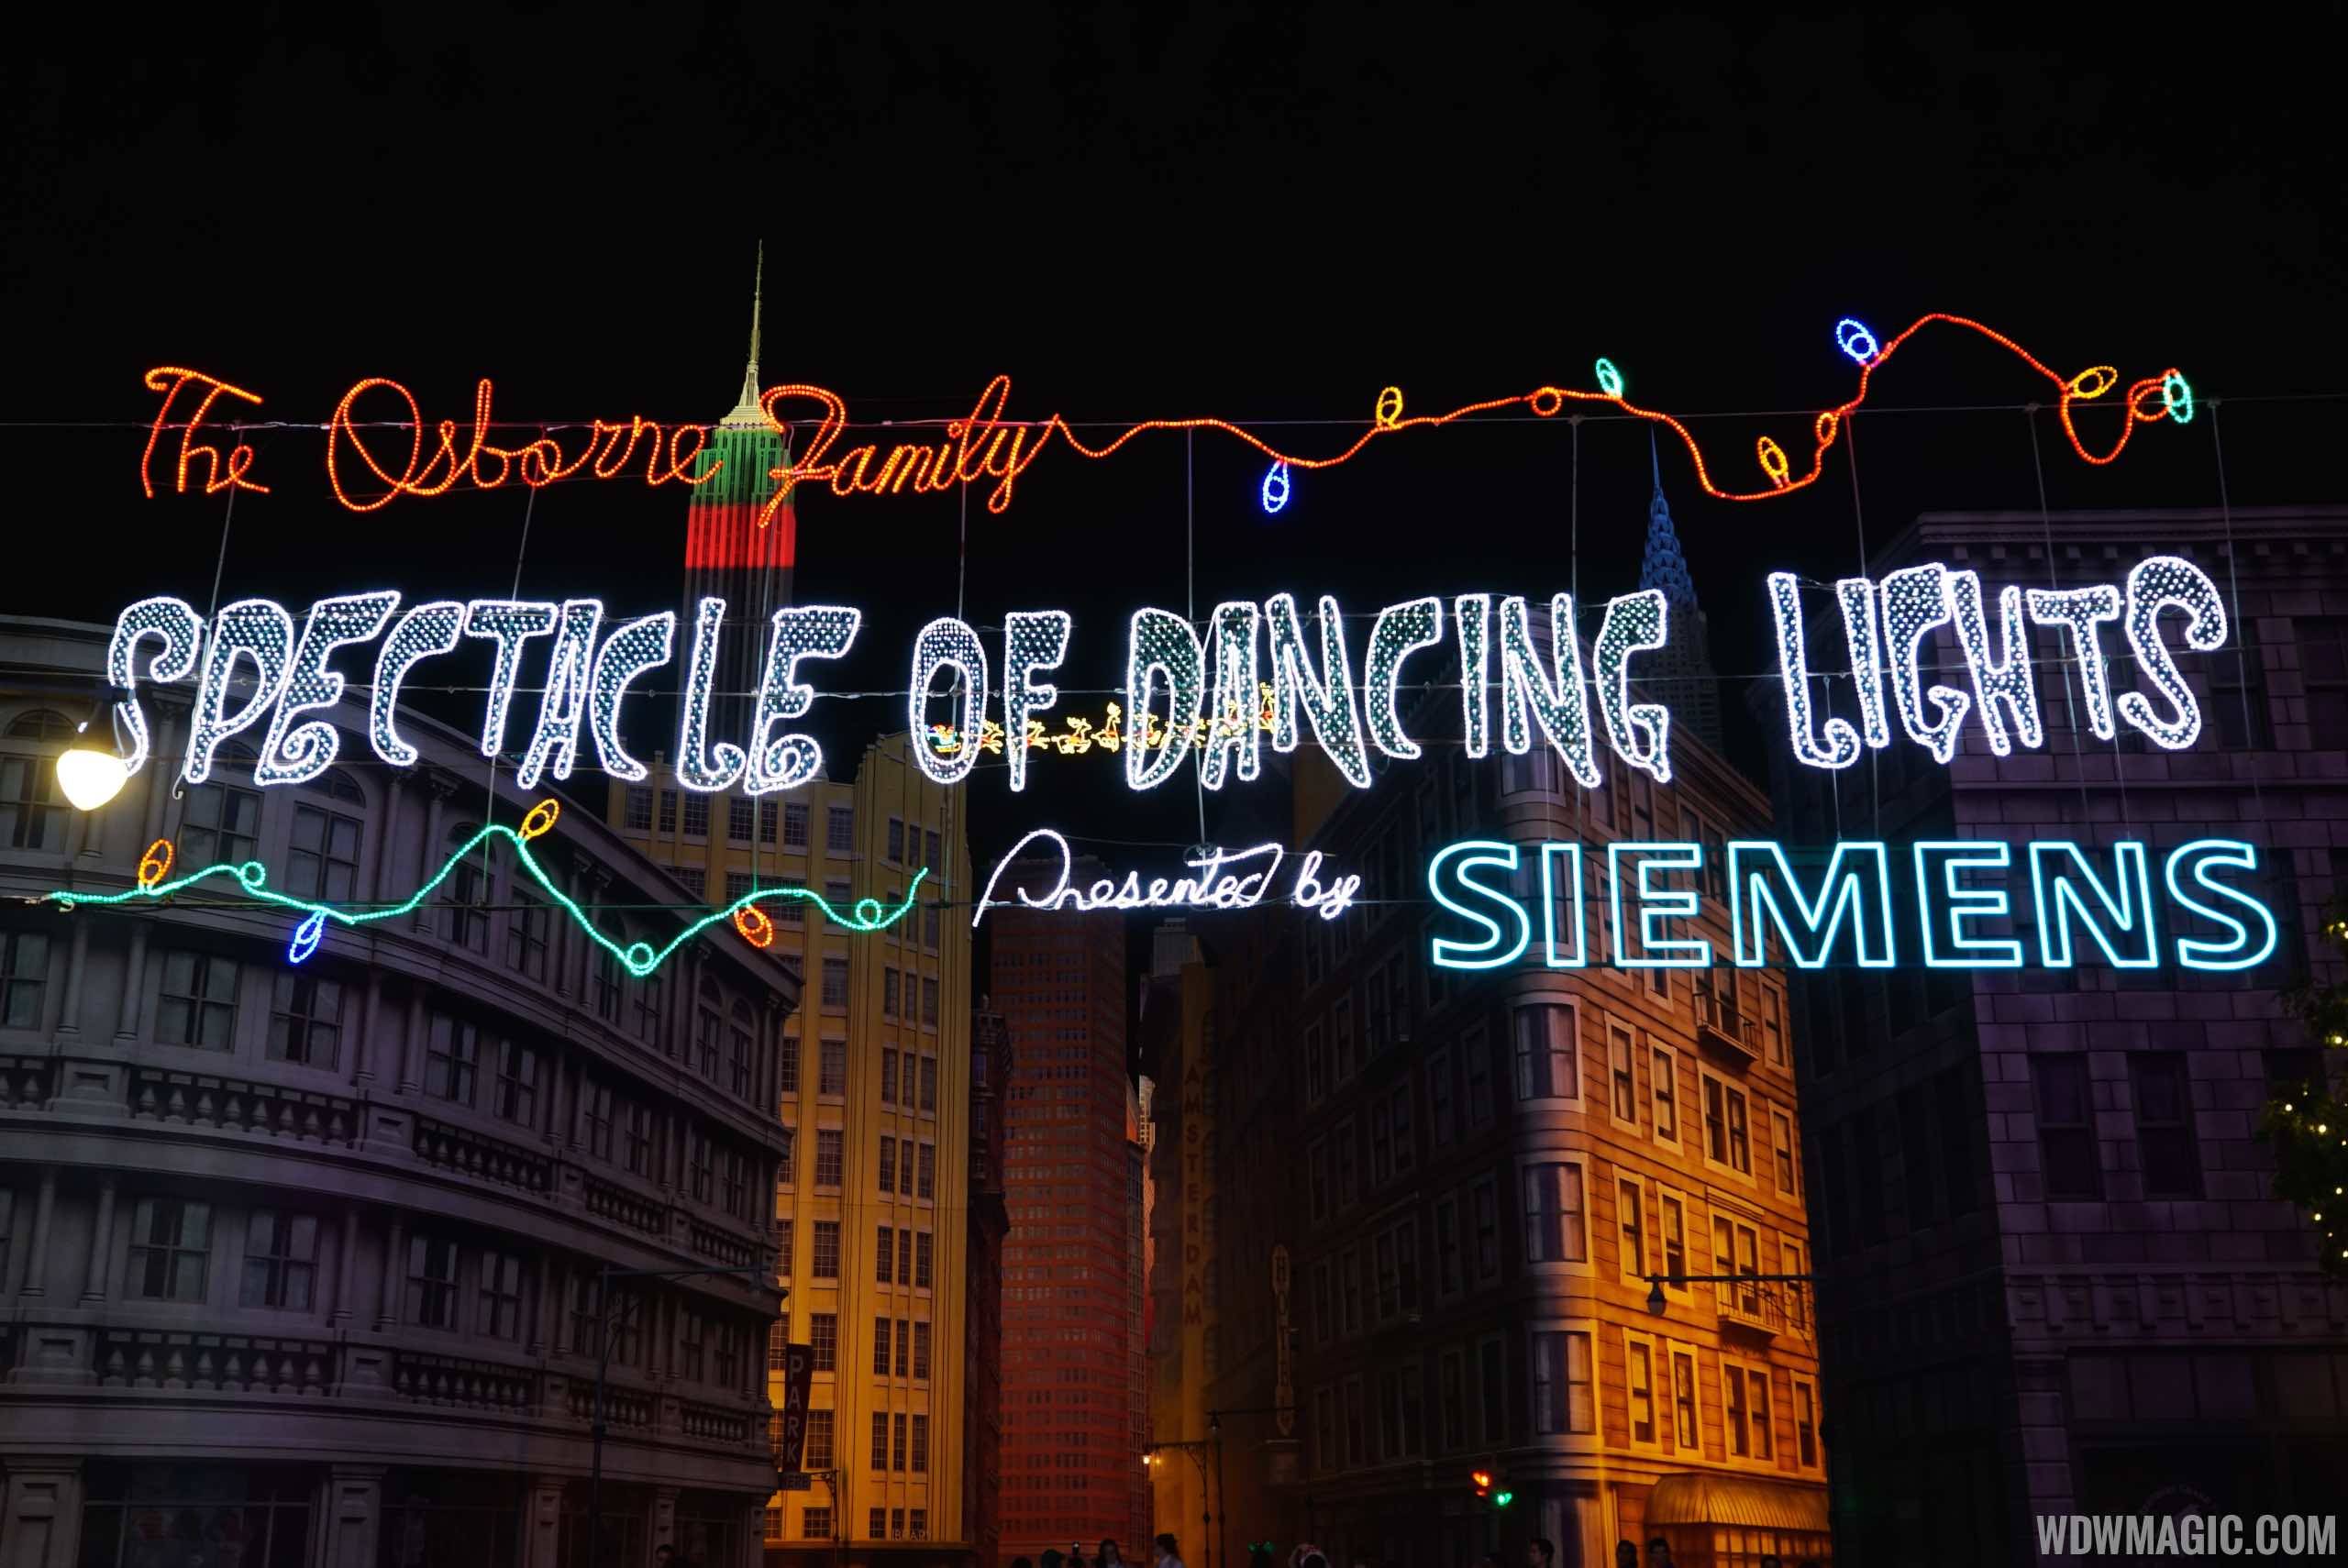 2015 will be the final year for the Osborne Family Spectacle of Dancing Lights